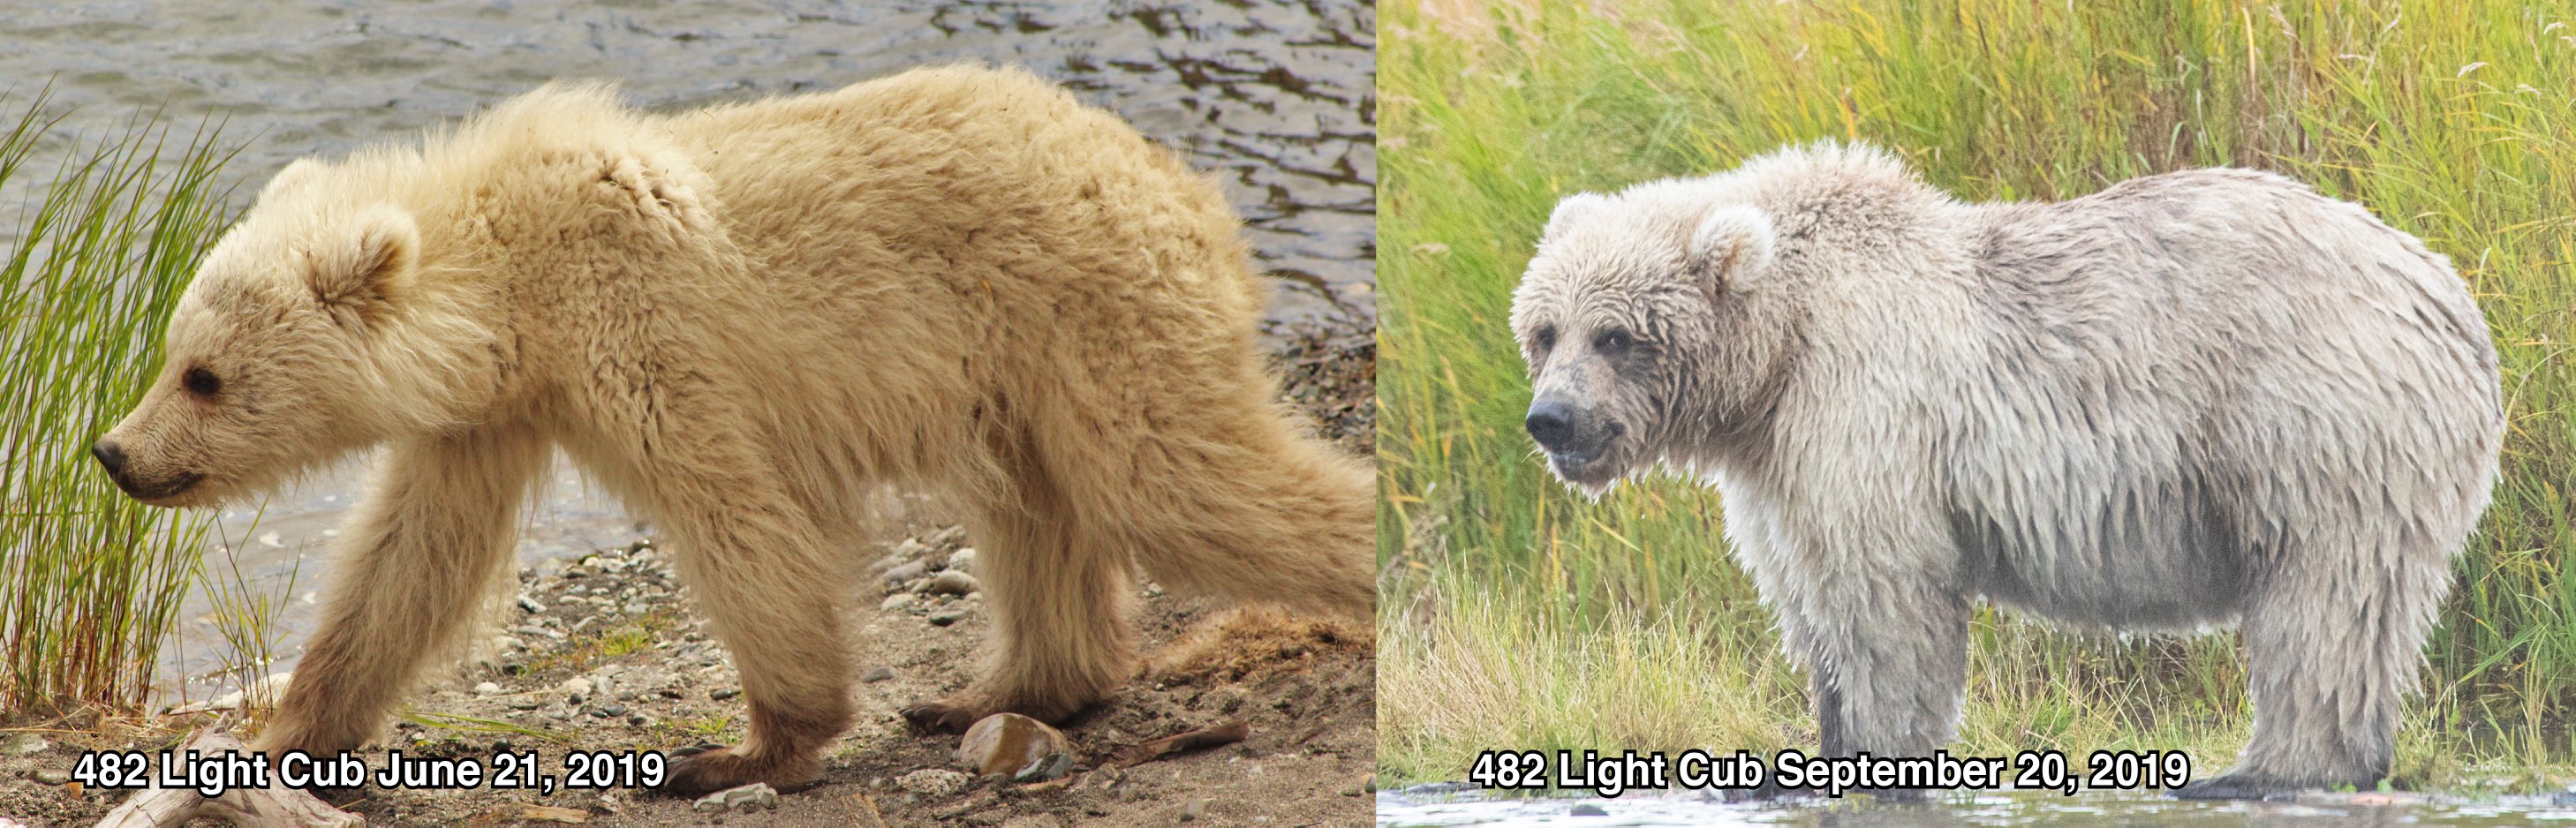 Katmai National Park celebrates Fat Bear Week and just crowned the FATTEST of ‘em all - Alvinology